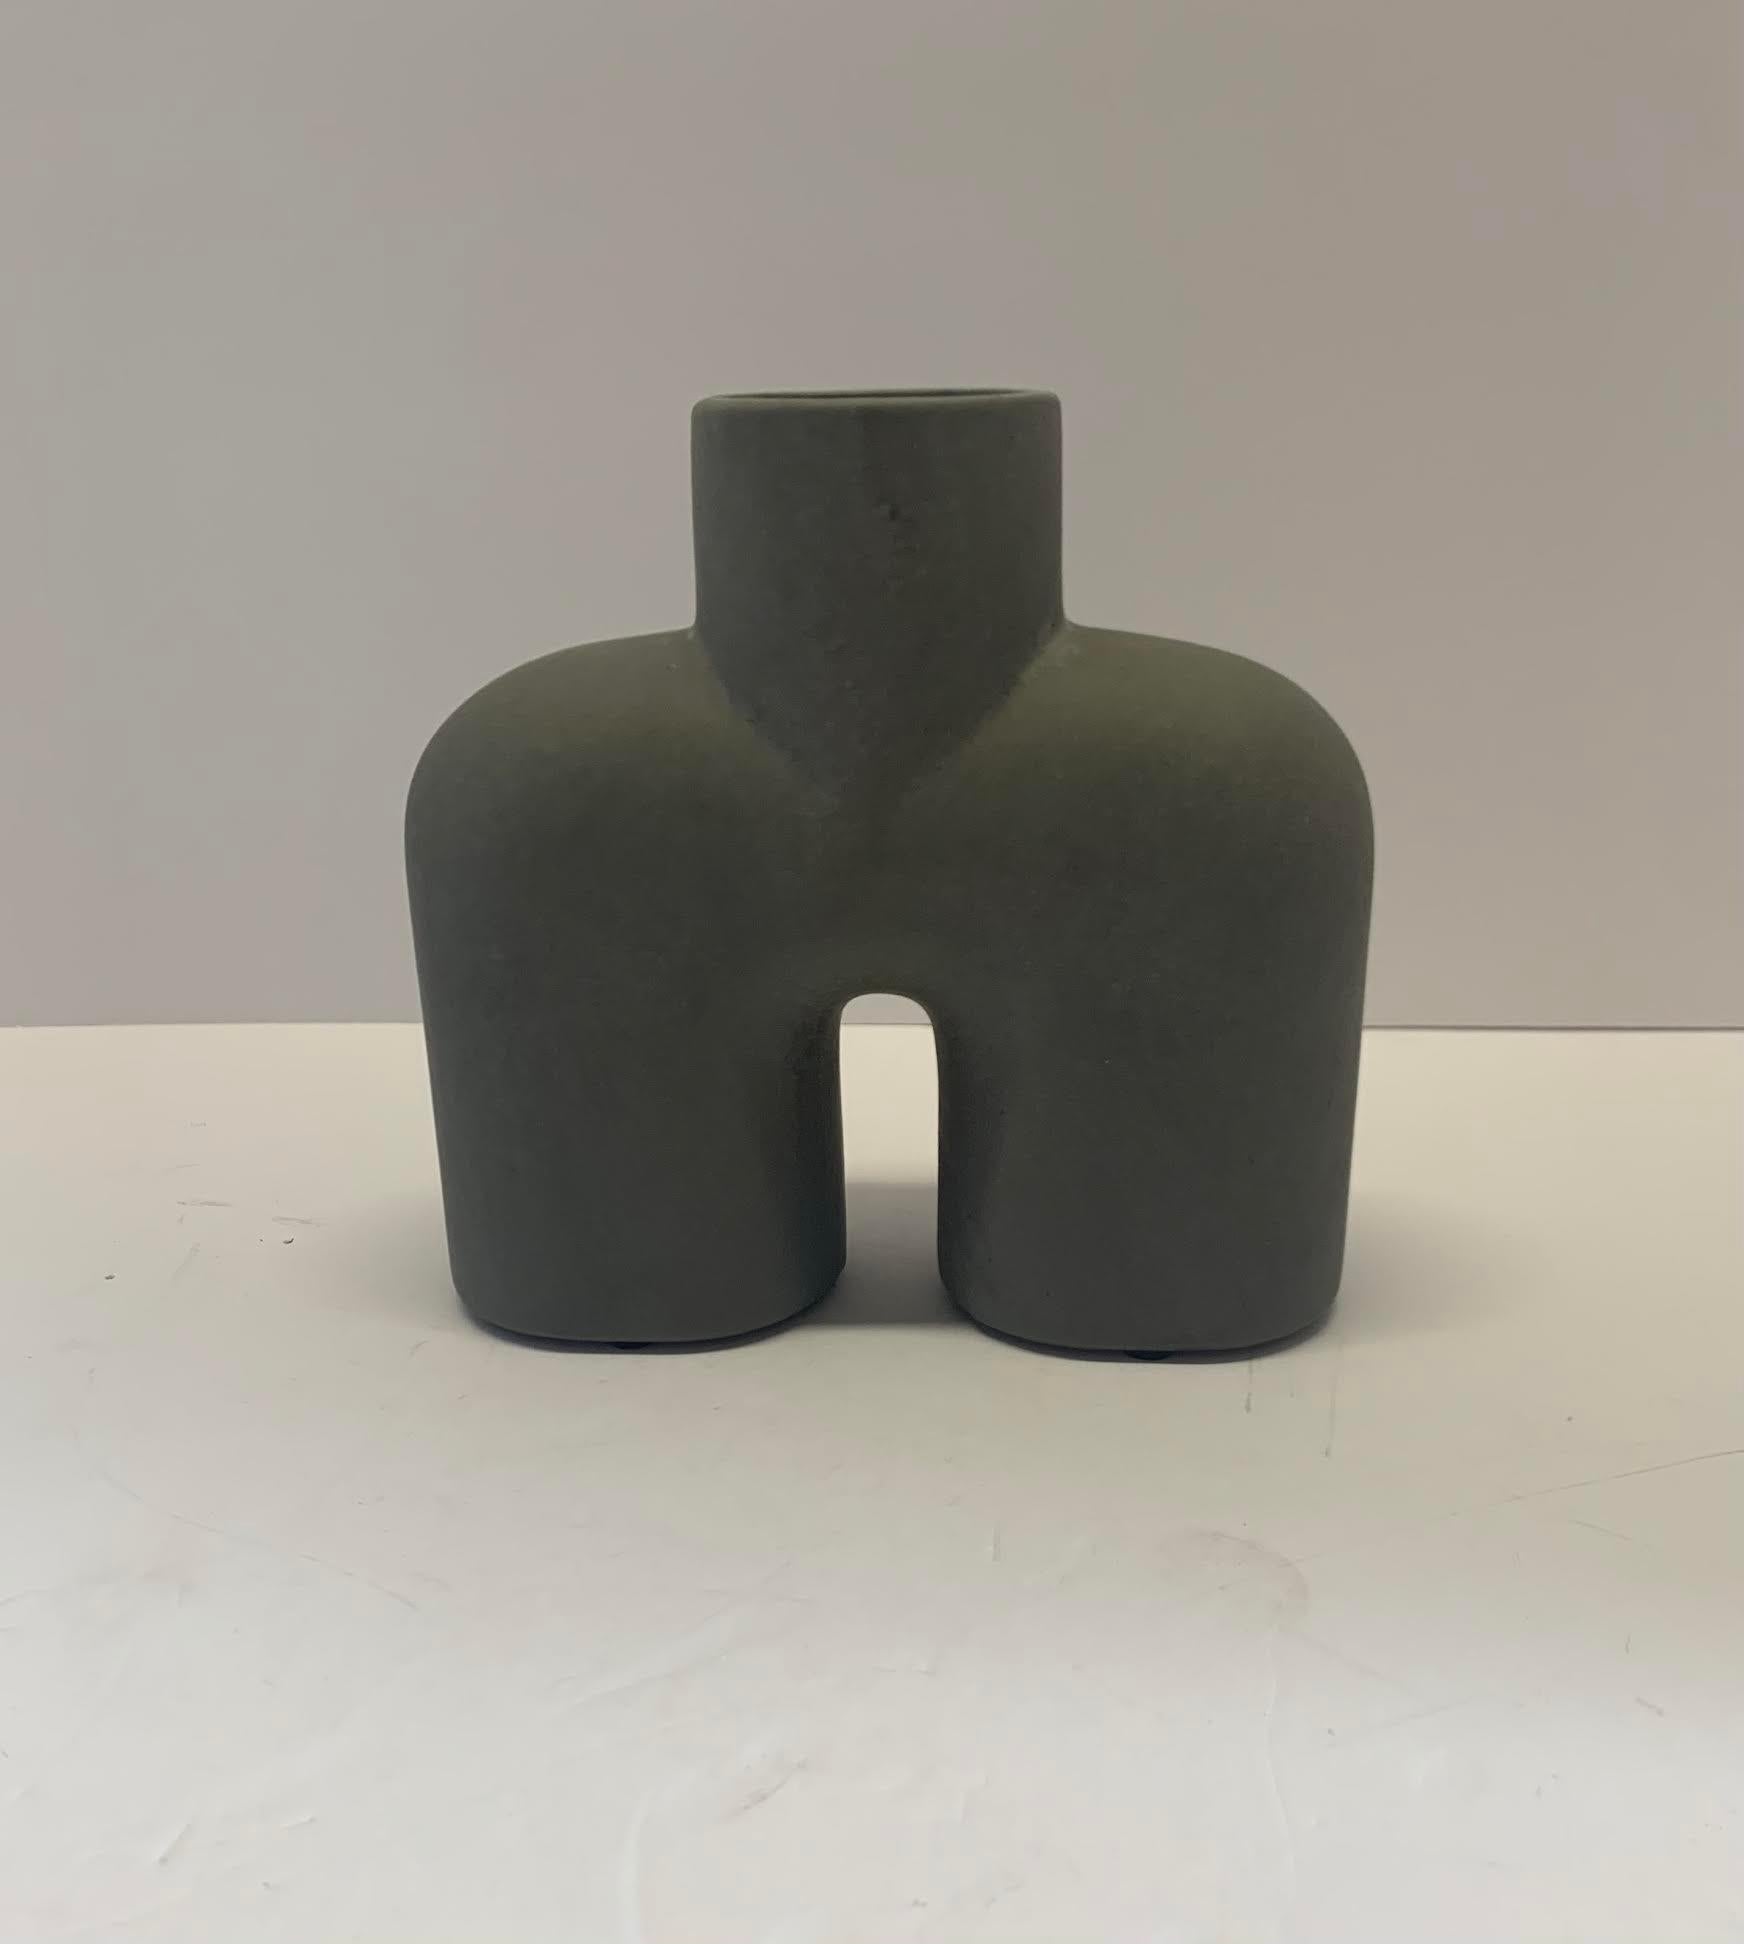 Matte Grey Sculptural Danish Design Vase, China, Contemporary In New Condition For Sale In New York, NY